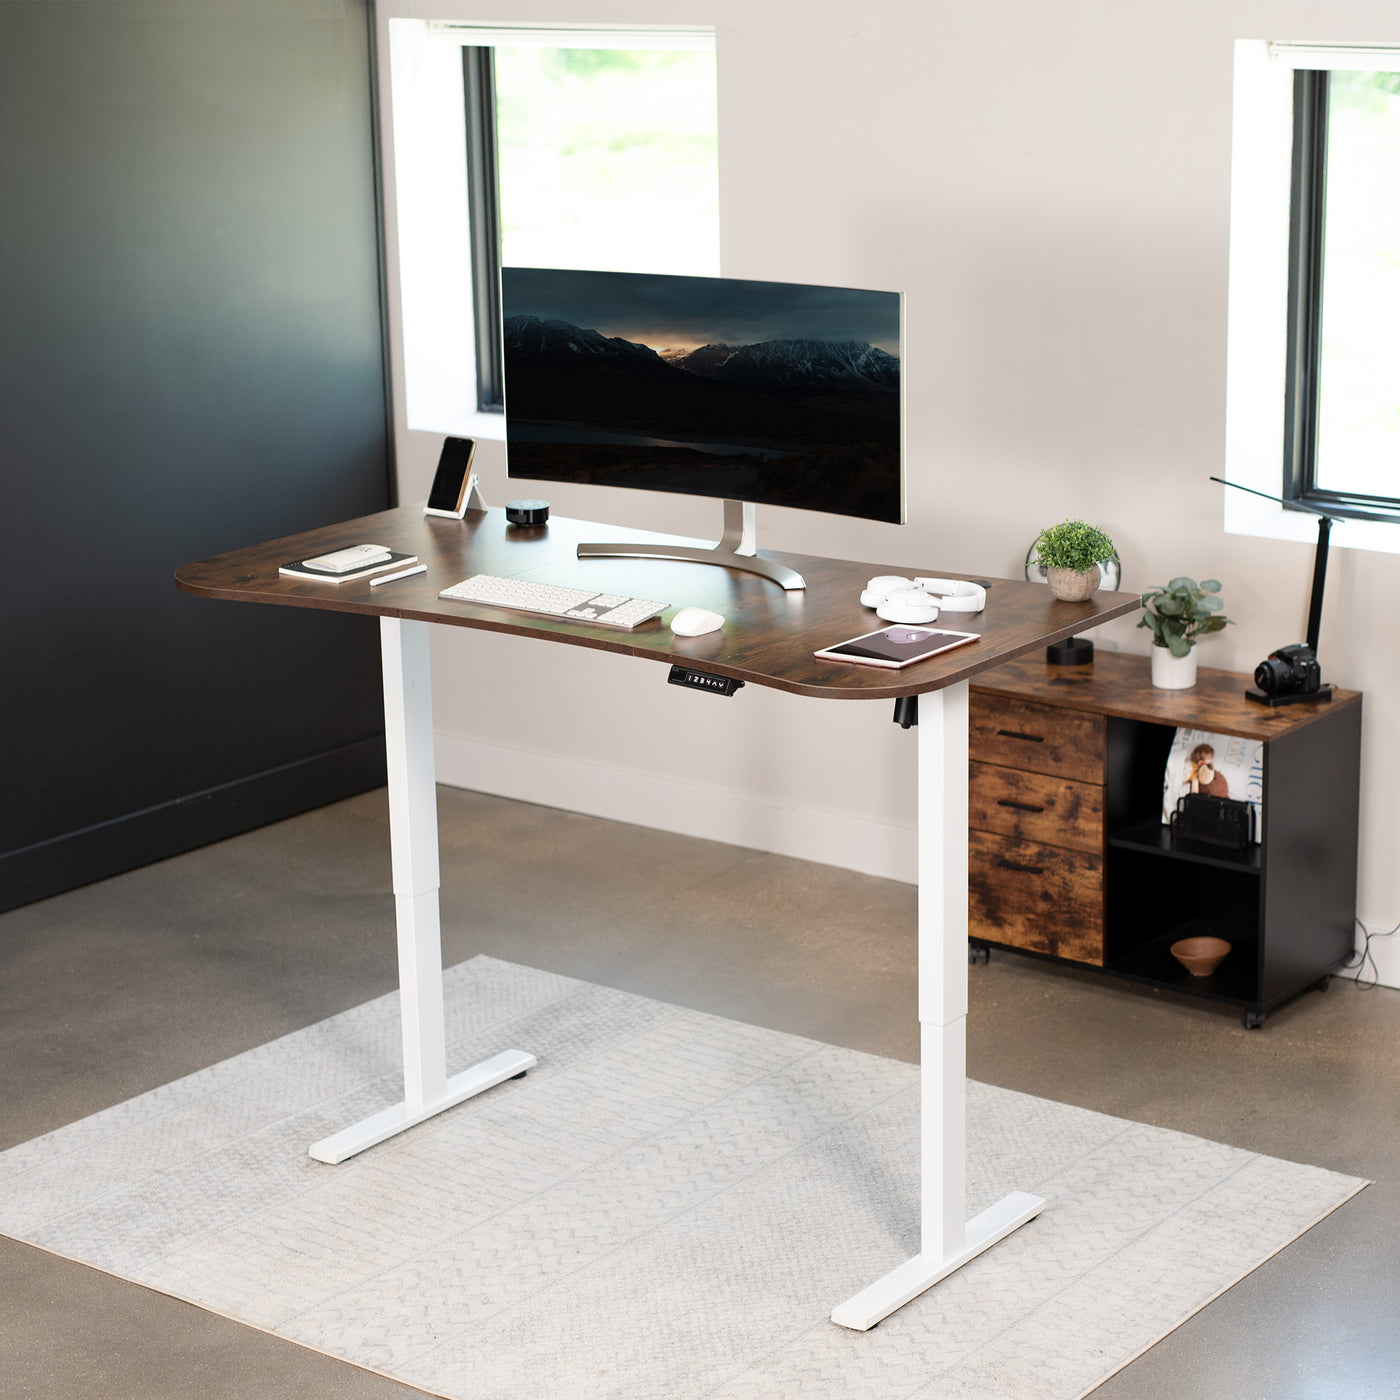 Rustic sit to stand height adjustable electric desk with push button memory controller for ergonomic office workstation.